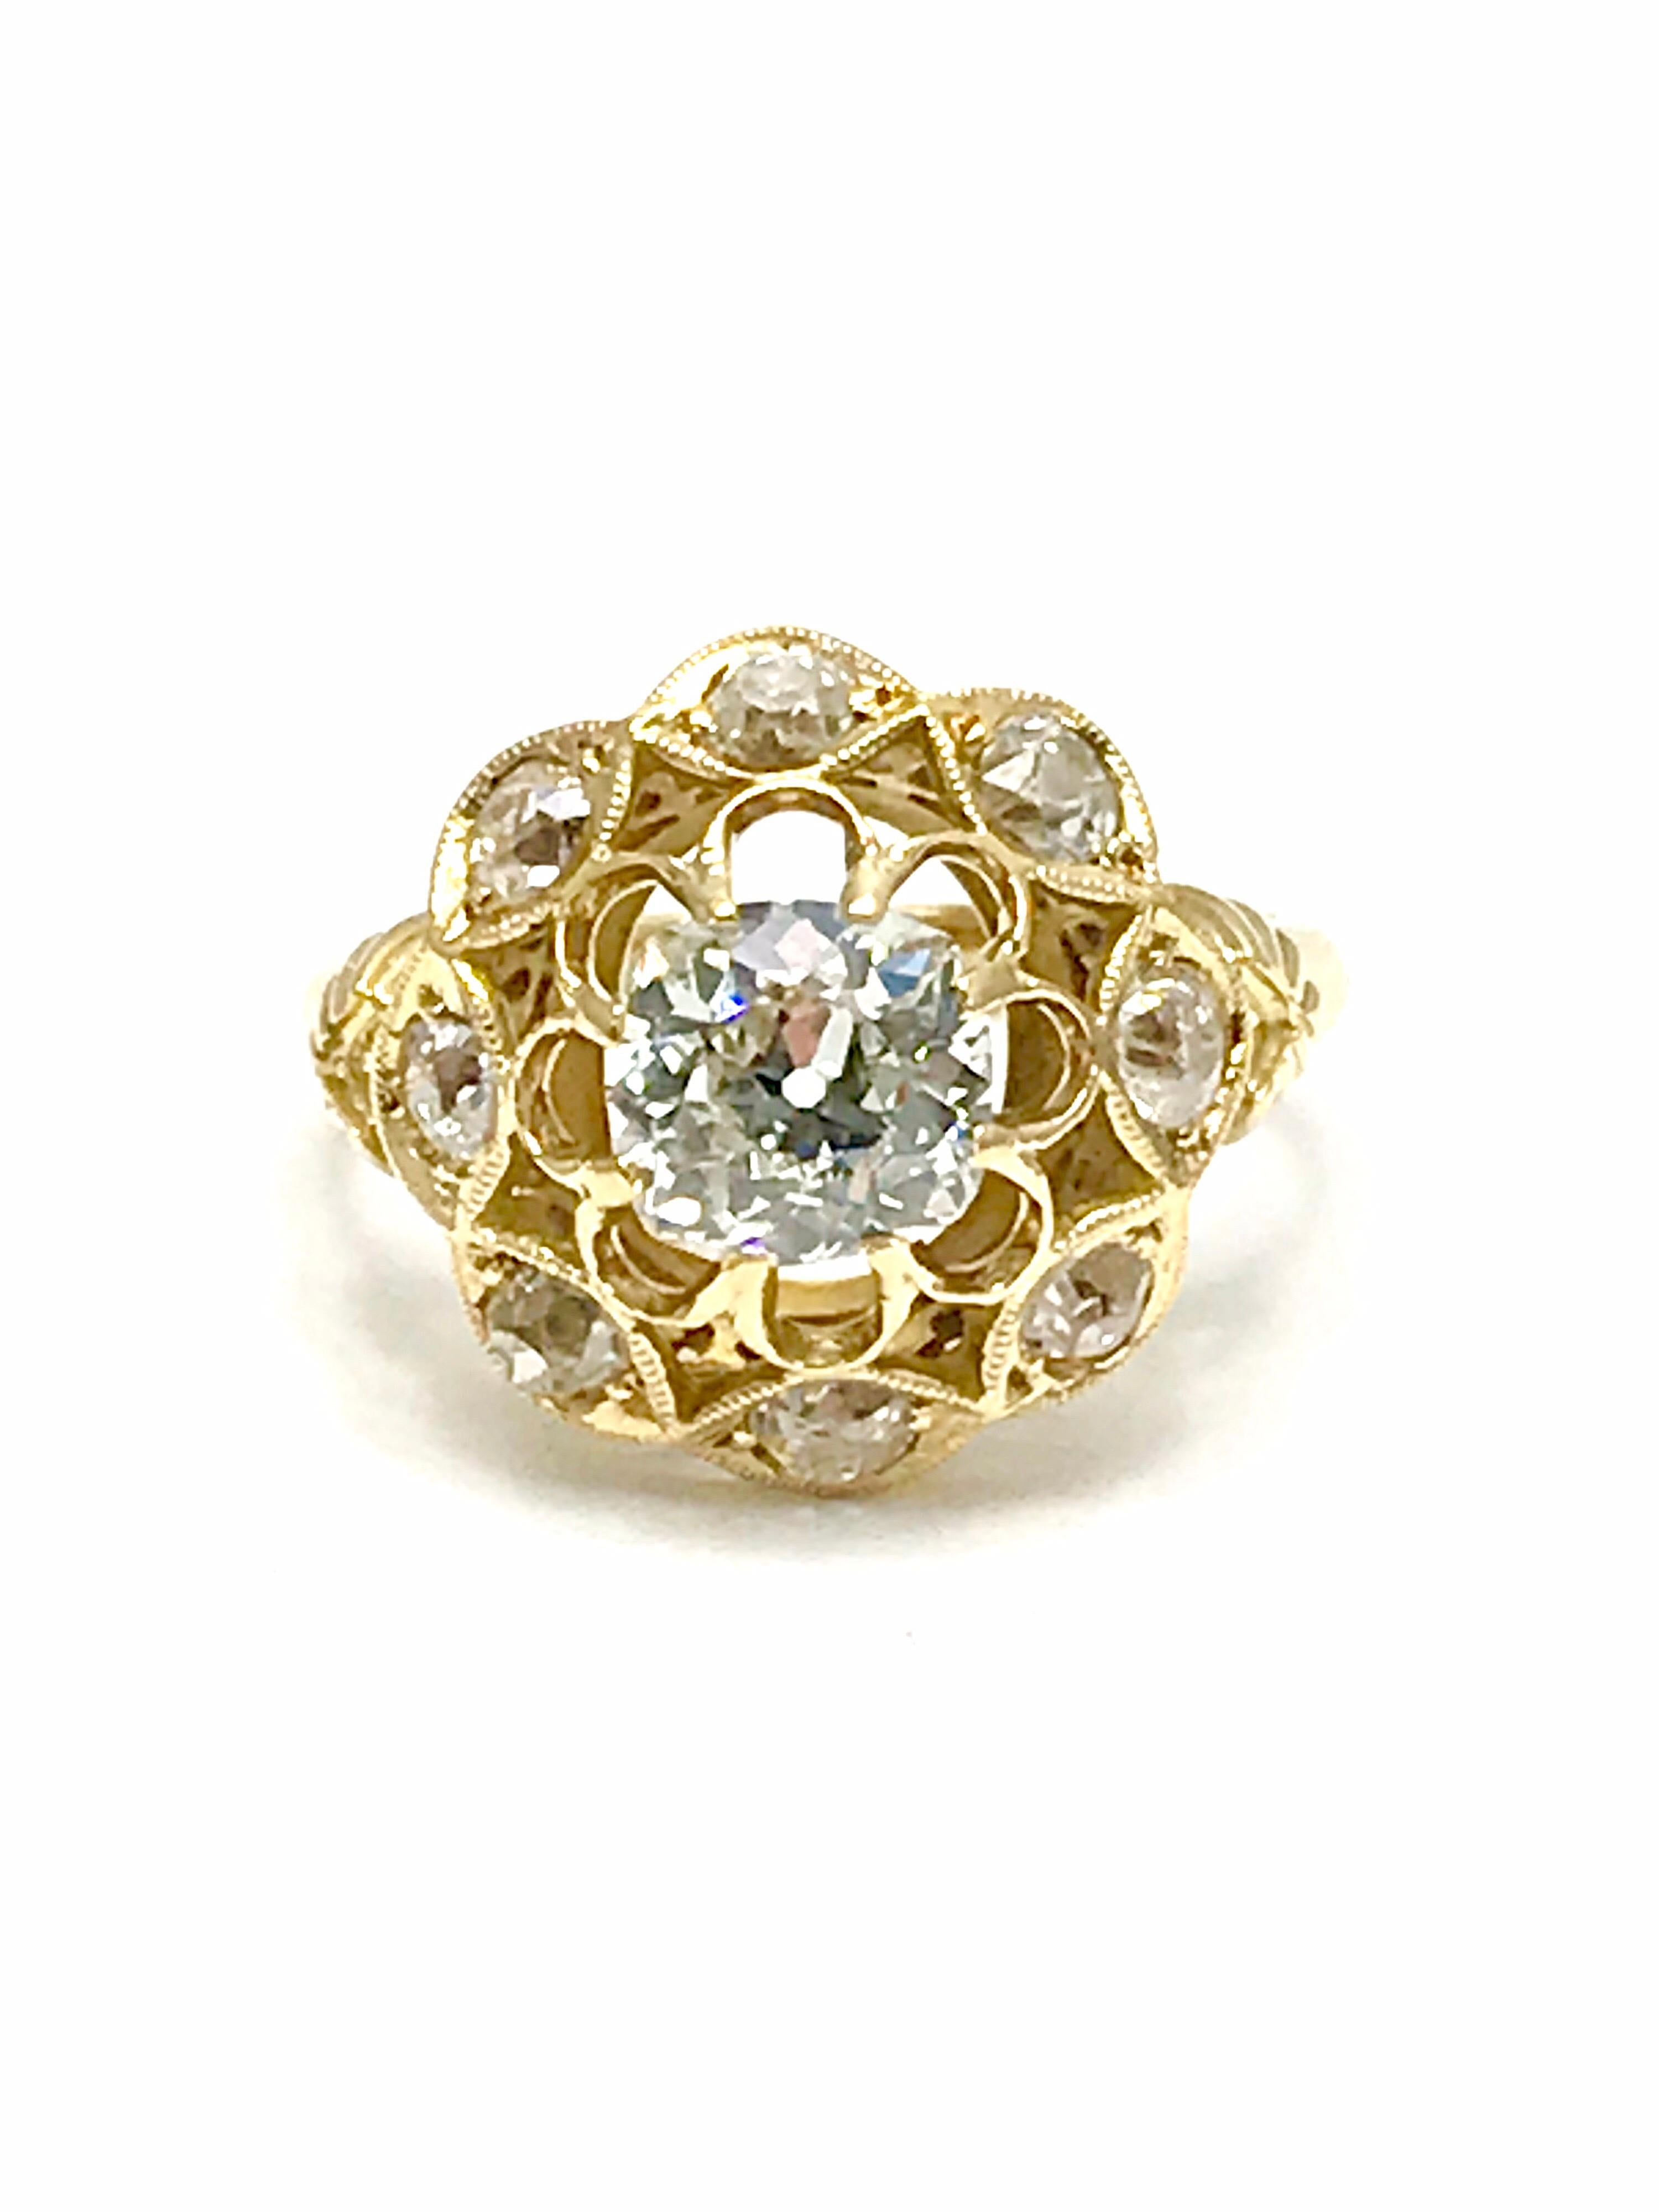 A beautiful 1.29 carat old Mine Cut Diamond engagement/fashion ring set in 18 karat yellow gold.  The ring is designed with the center Diamond set in eight prongs, surrounded by open metal work, and framed by a single row of eight Old Mine Cut